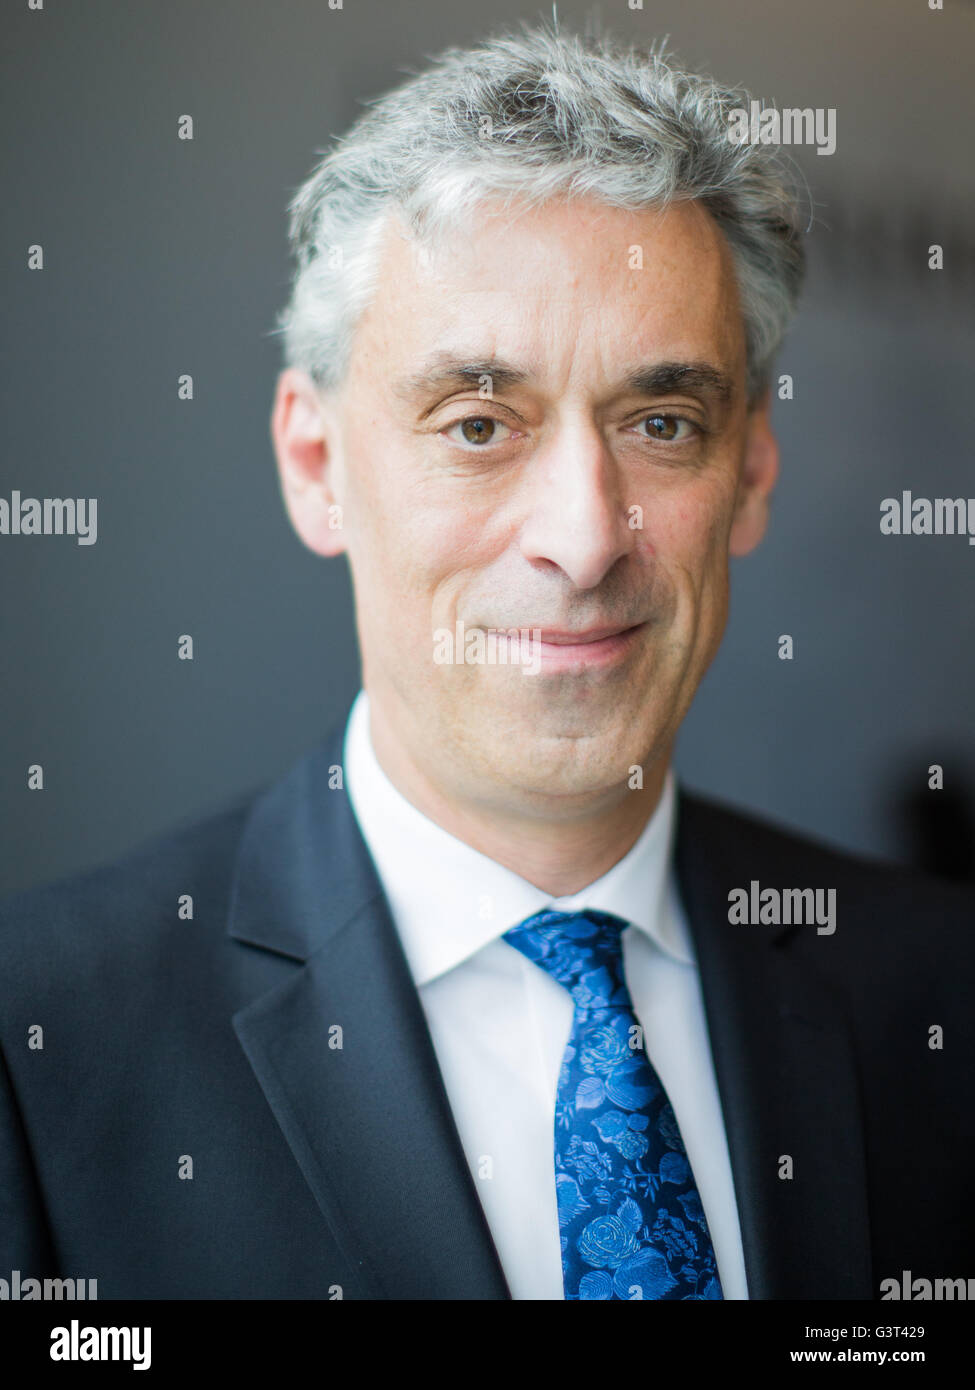 Duesseldorf, Germany. 14th June, 2016. Frank Appel, Chairman of Deutsche Post, posing during the presentation of the project 'Klima-Expo NRW 2016' at the state parliament in Duesseldorf, Germany, 14 June 2016. PHOTO: ROLF VENNENBERND/dpa/Alamy Live News Stock Photo